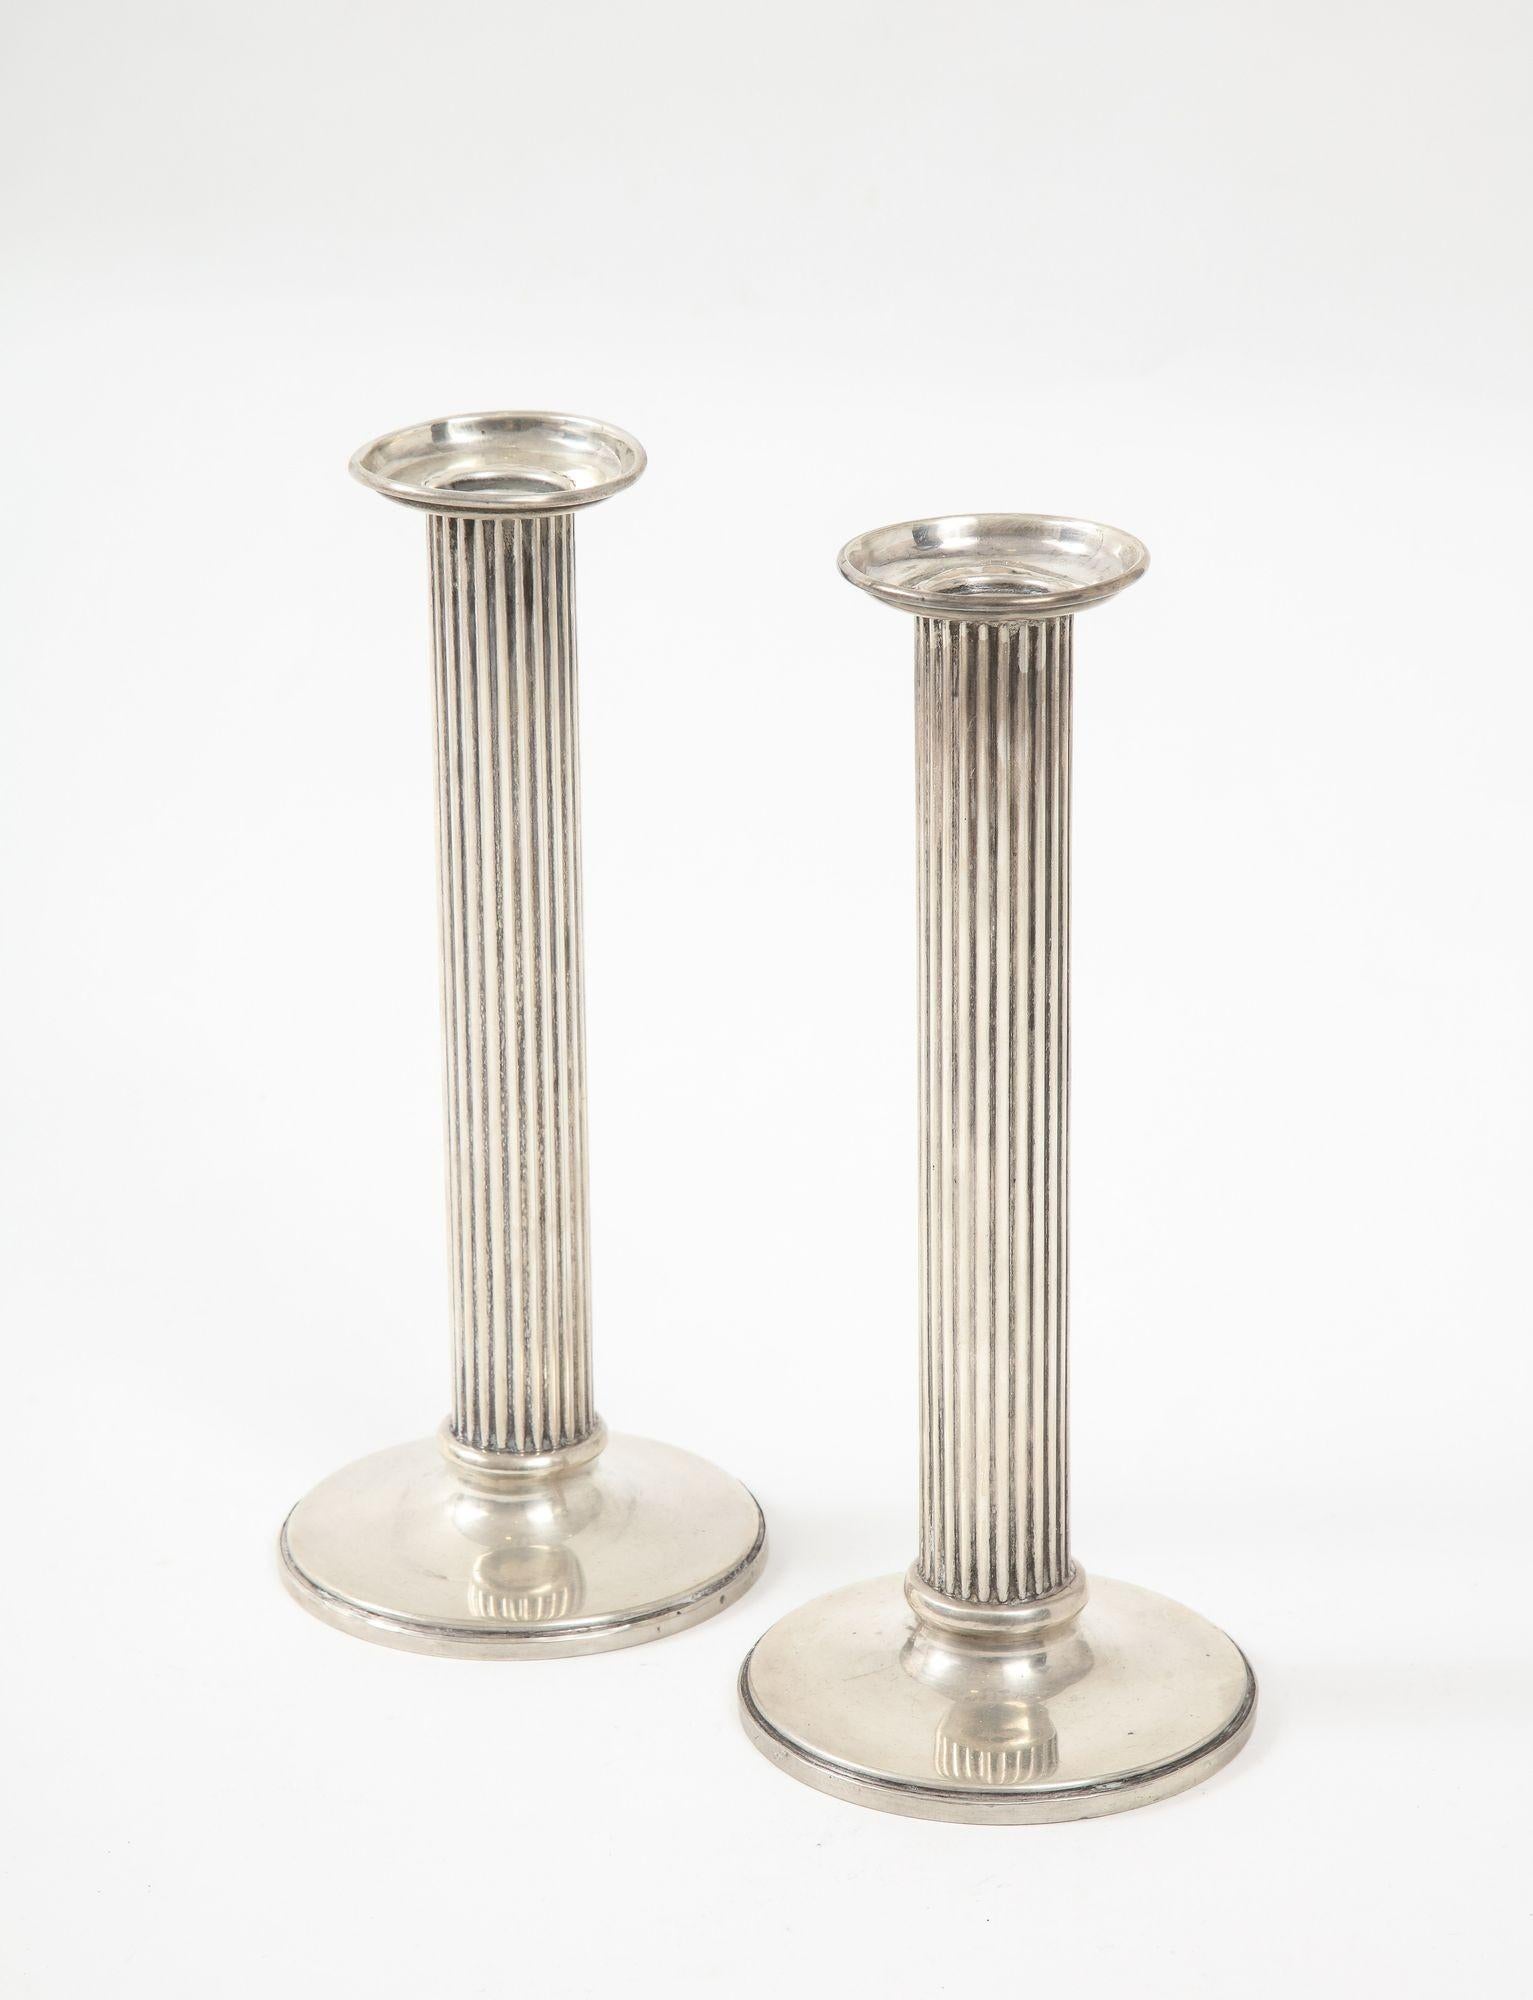 A great Pair of Sterling Silver Fluted Weighted Candlesticks signed Hamilton Sterling